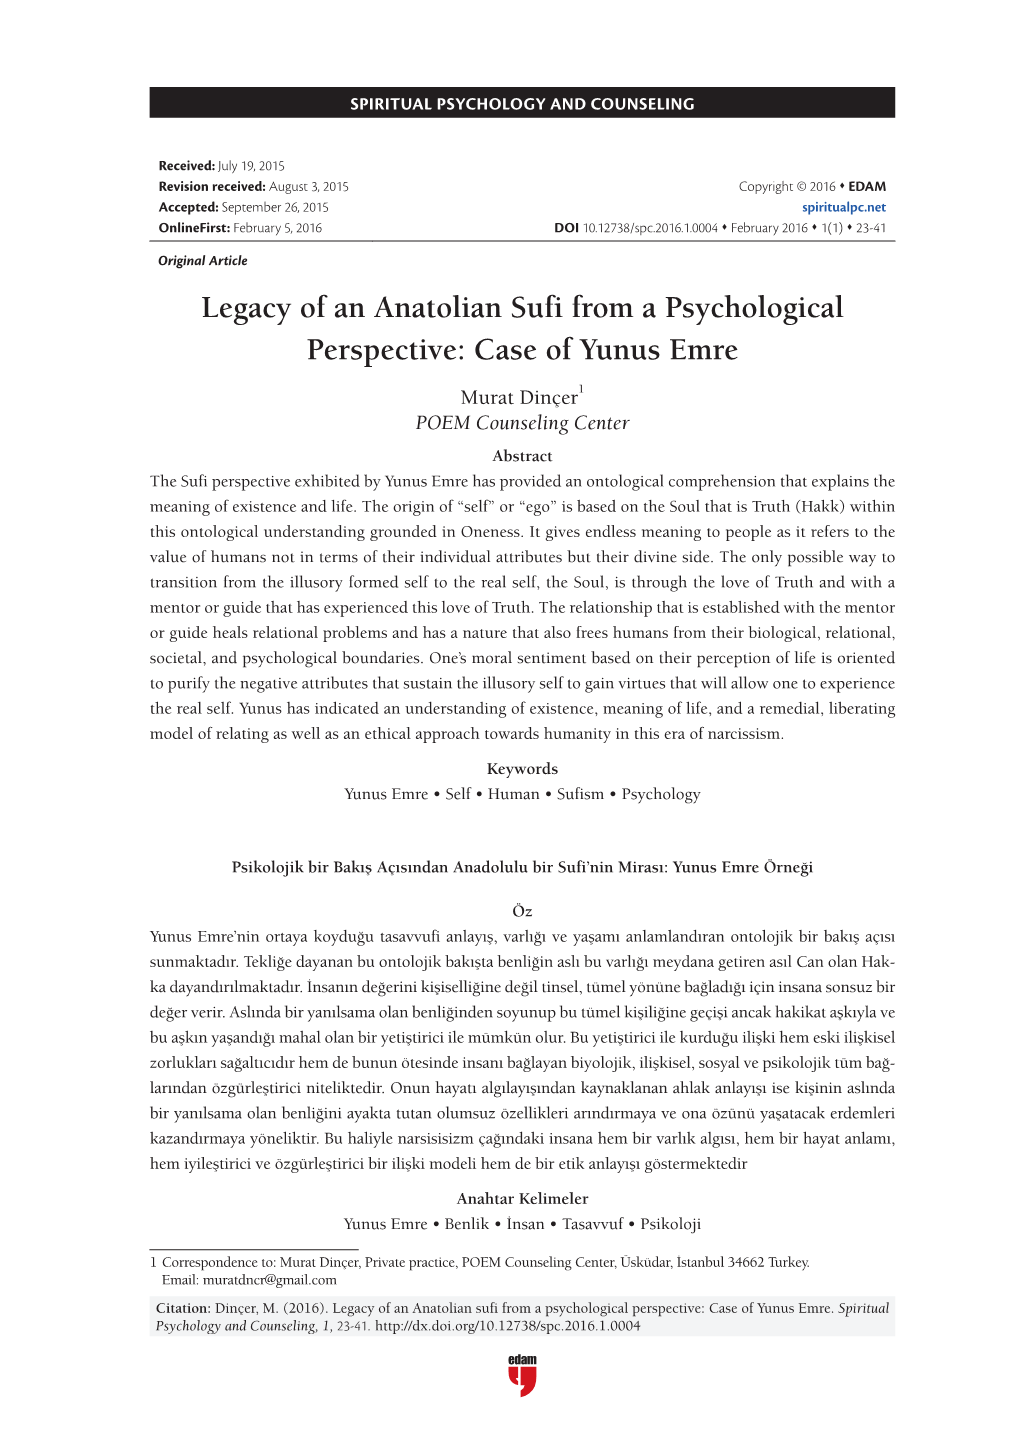 Legacy of an Anatolian Sufi from a Psychological Perspective: Case of Yunus Emre